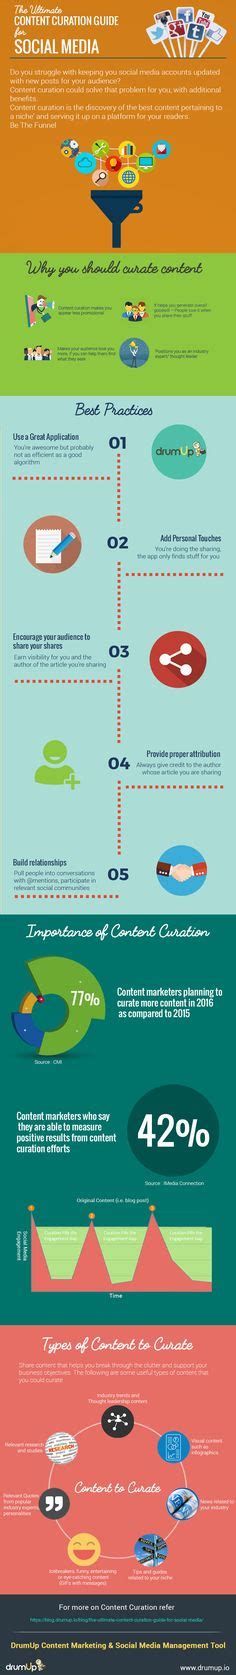 Best Practices Importance And Type Of Content Curation Digital